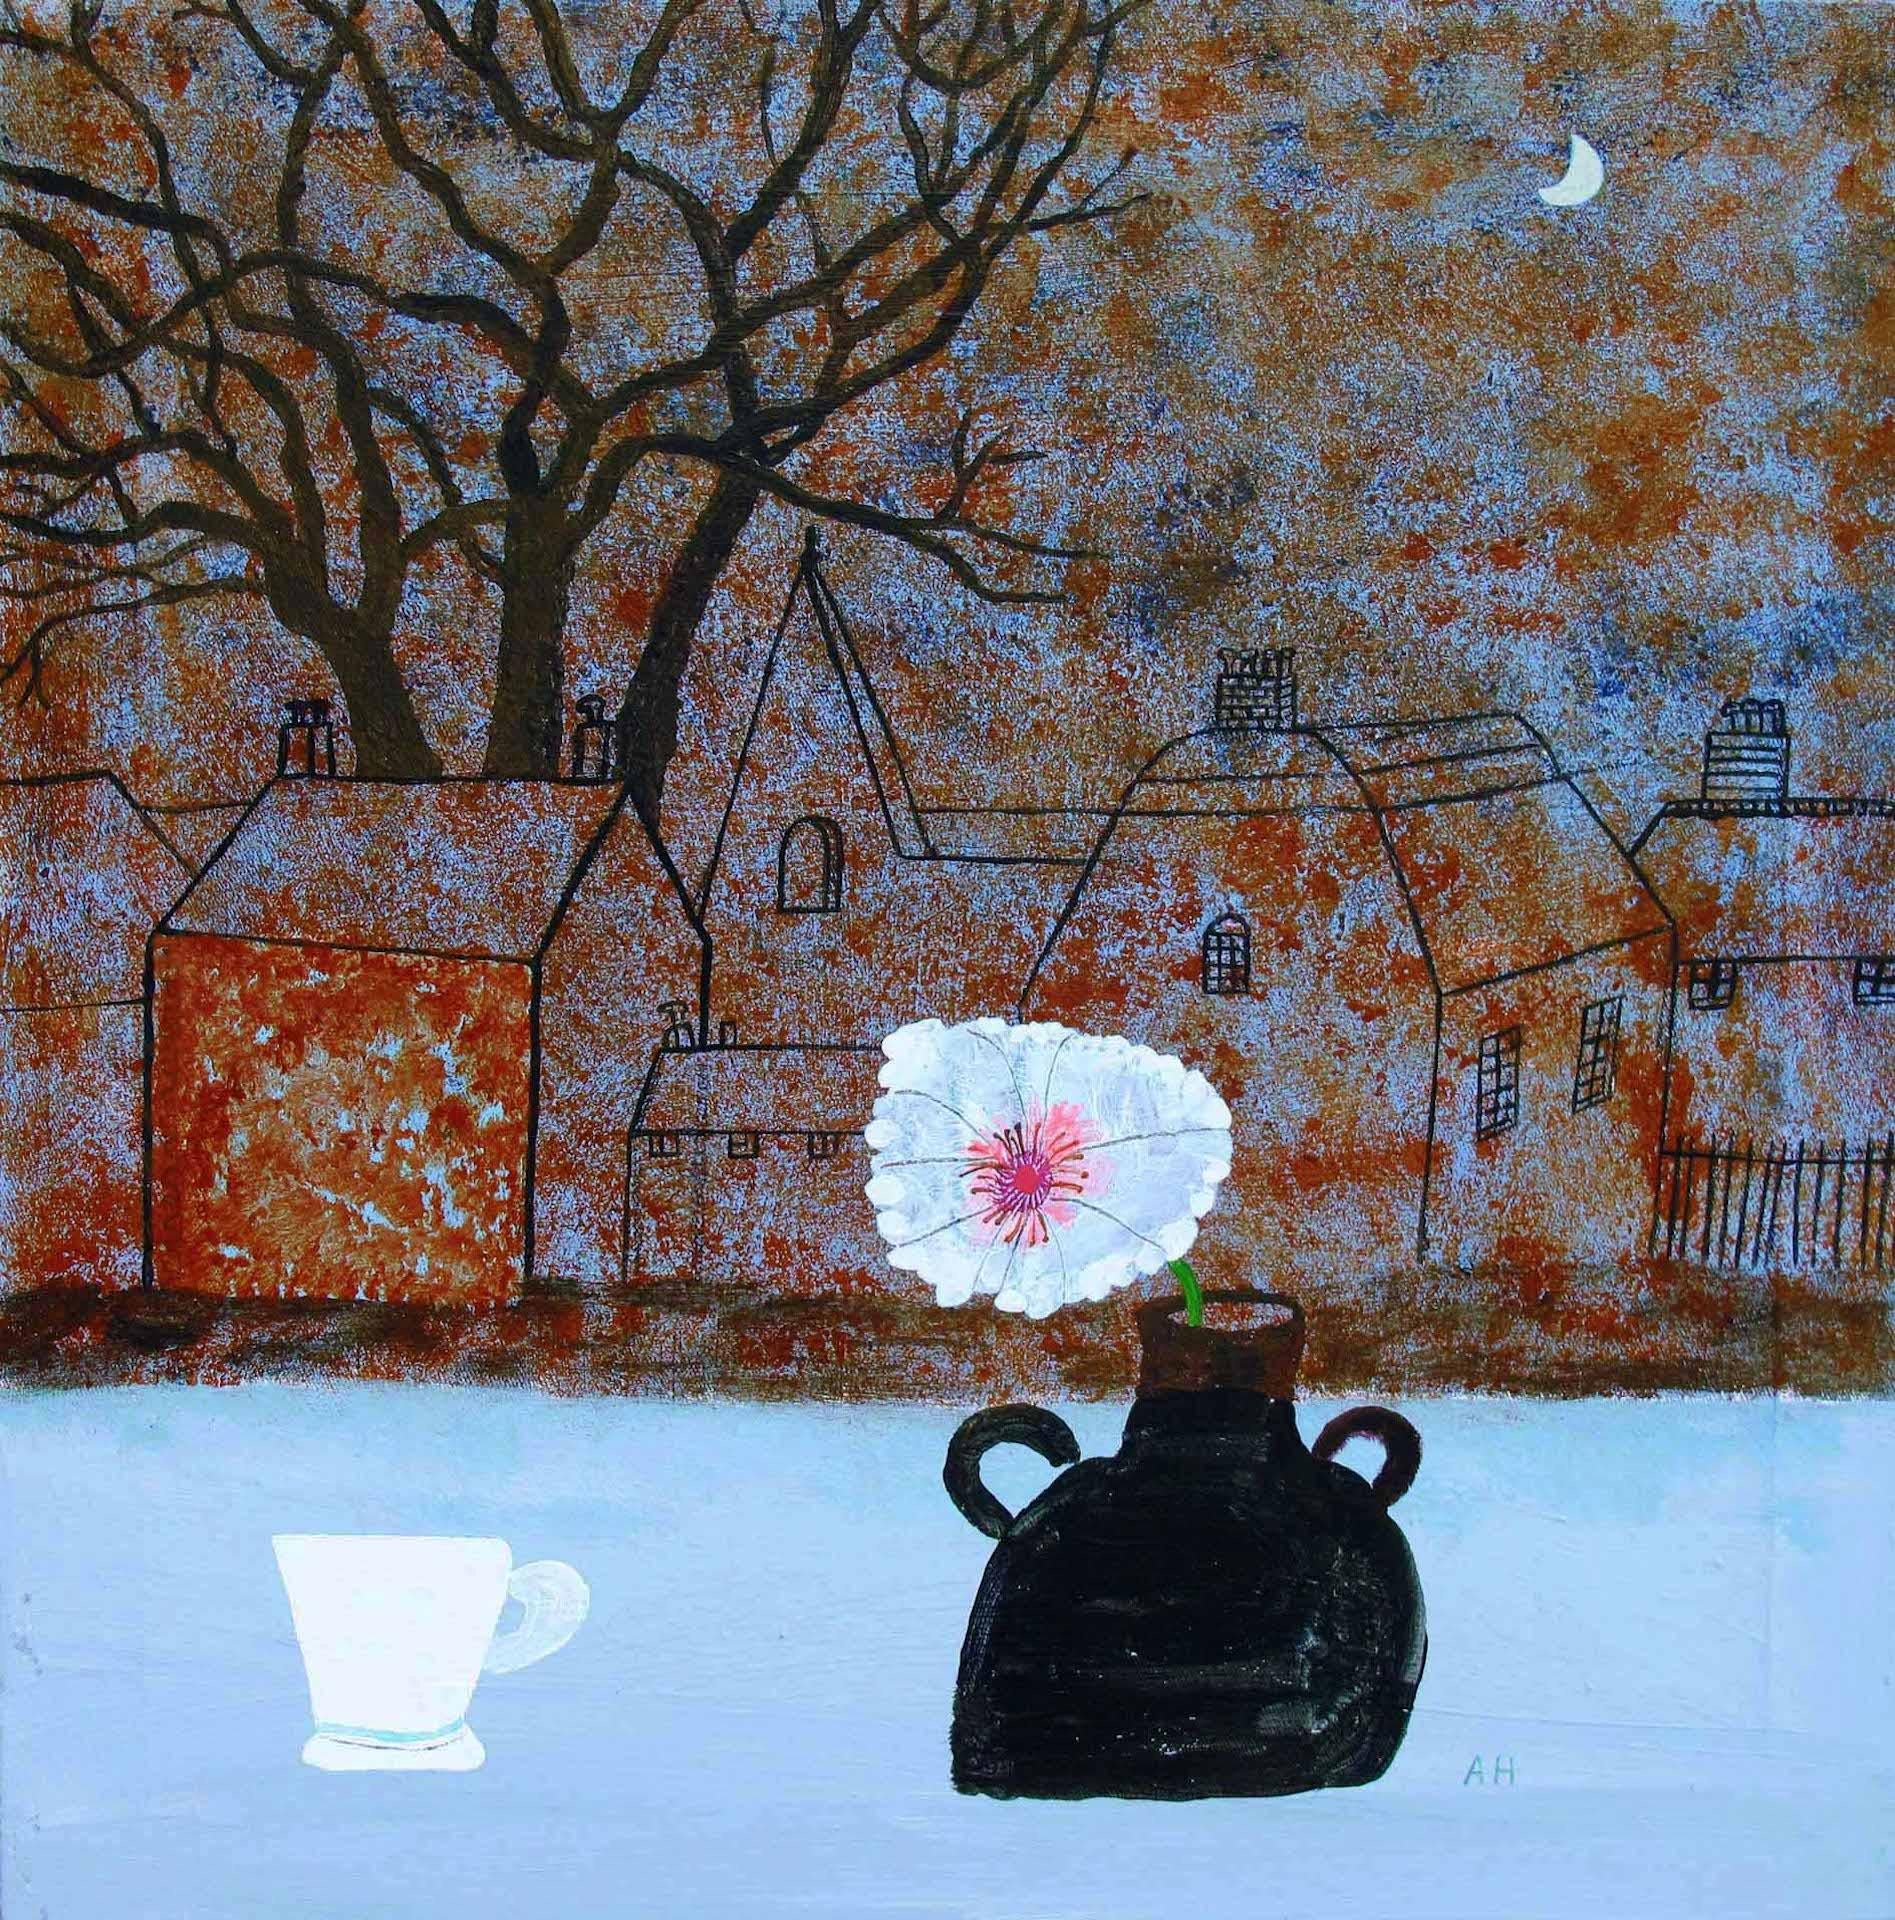 Andrea Humphries
Village Green II
Original Still Life Painting
Acrylic and mixed media on canvas
Size: H 45cm x W 45cm
Sold Framed in a Natural Wood Box
Please note that in situ images are purely an indication of how a piece may look.

Village Green